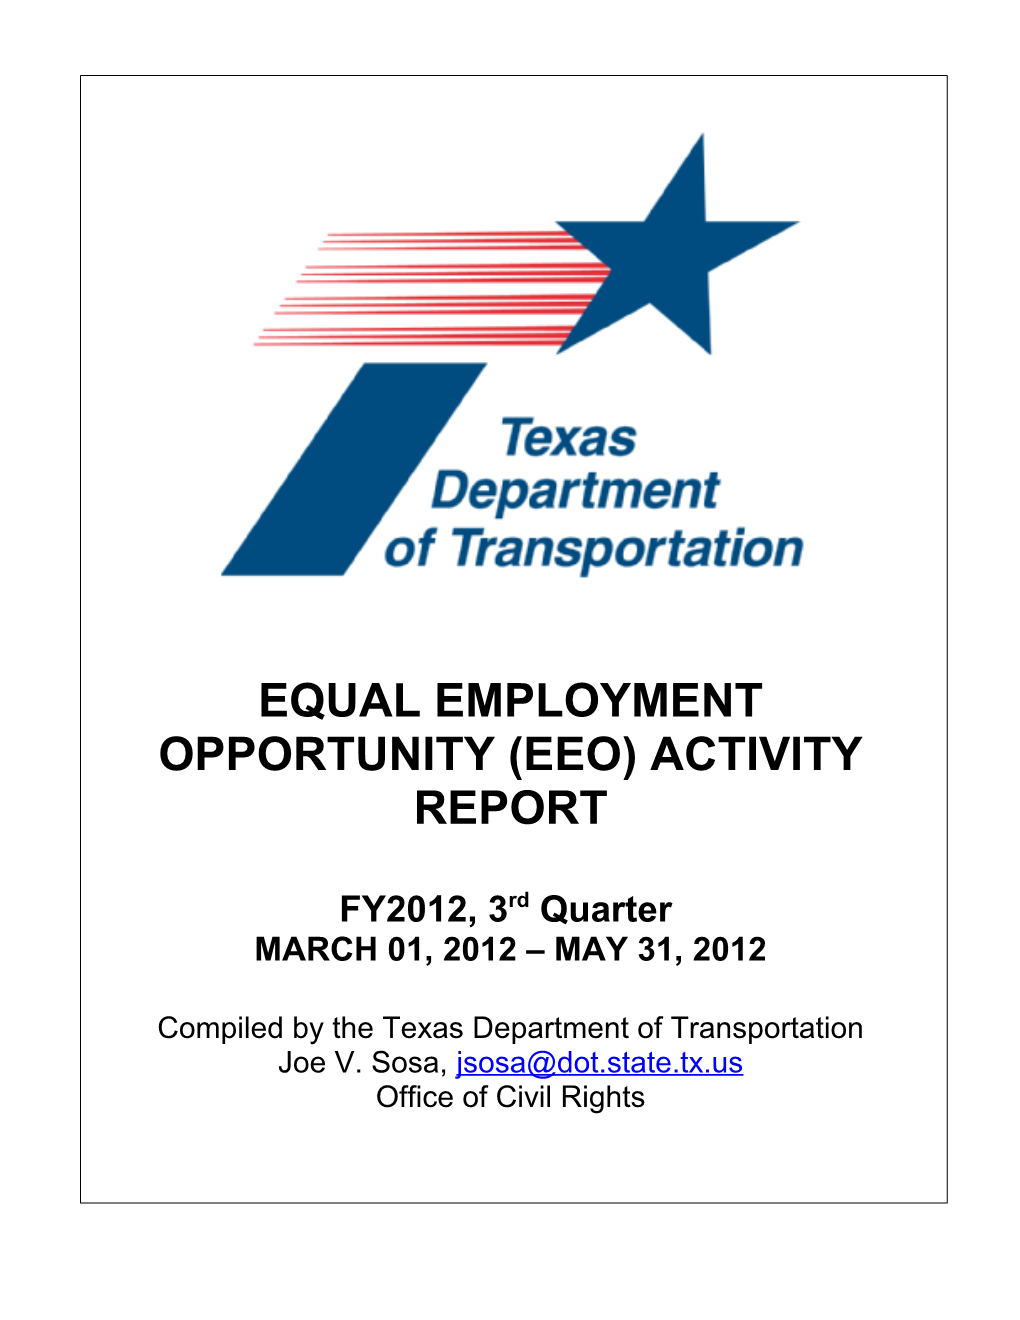 Equal Employmentopportunity (Eeo) Activity Report